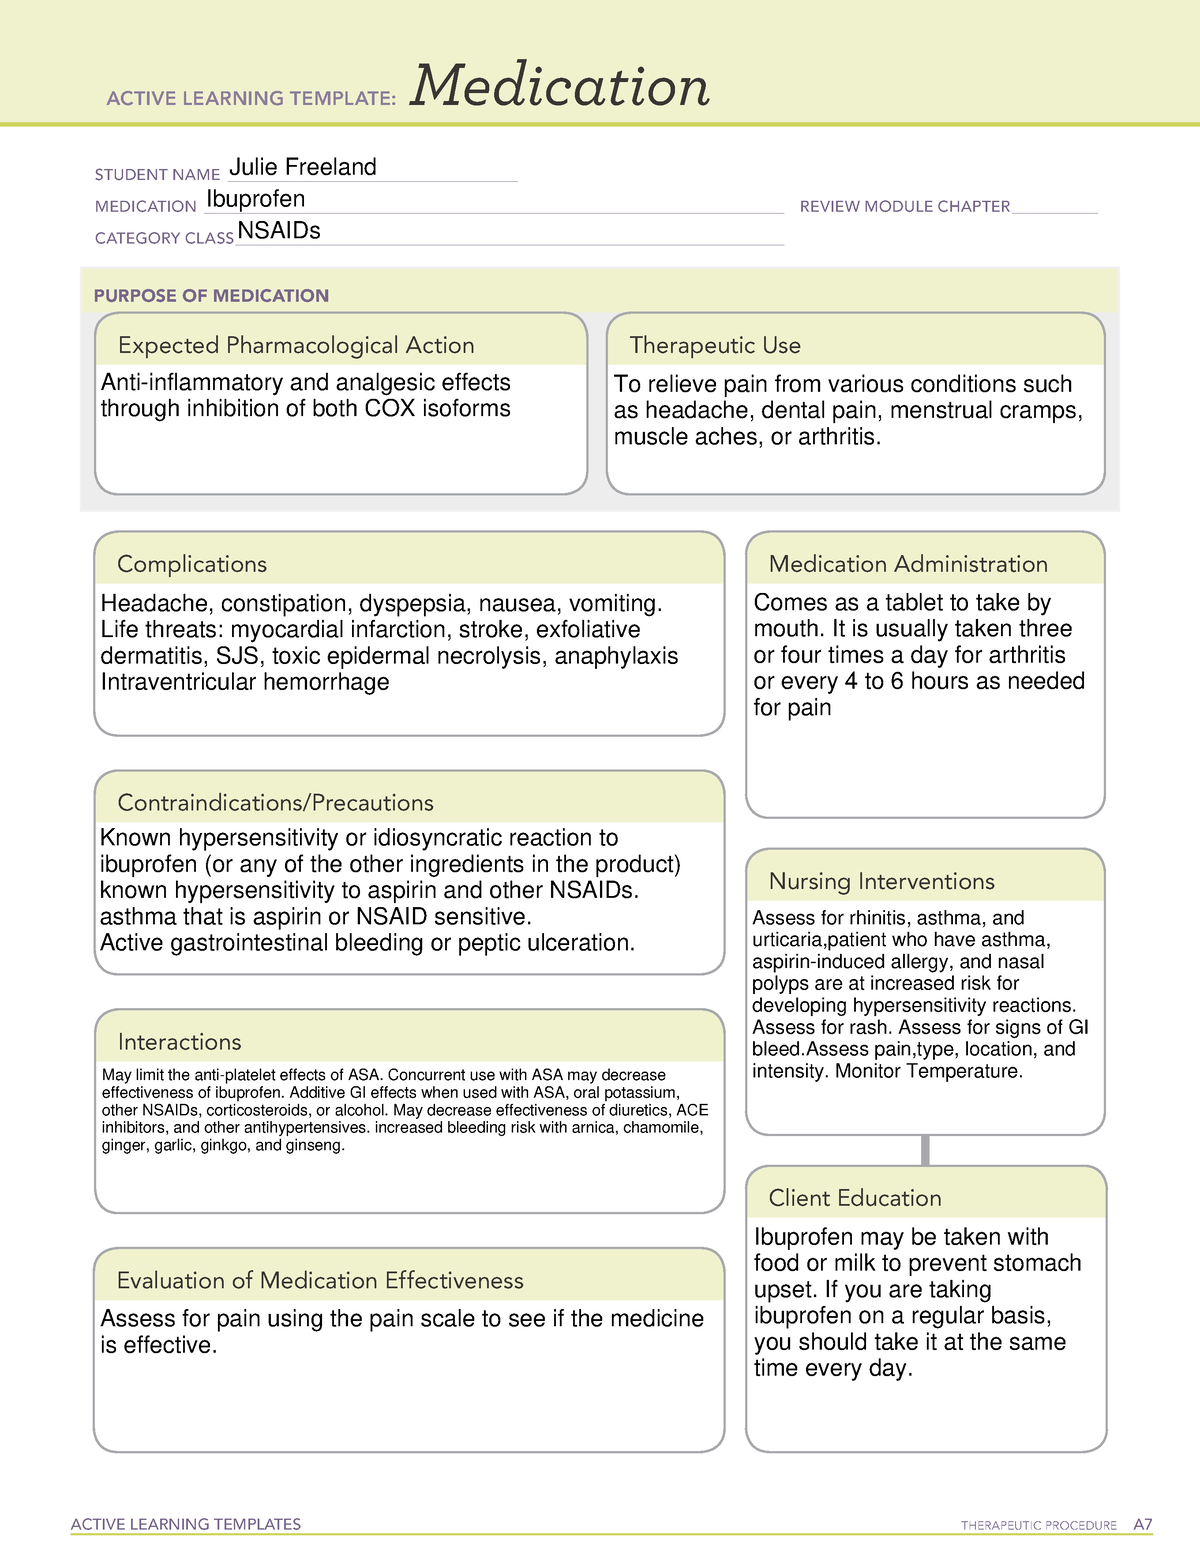 Active Learning Template Ibuprofen ACTIVE LEARNING TEMPLATES